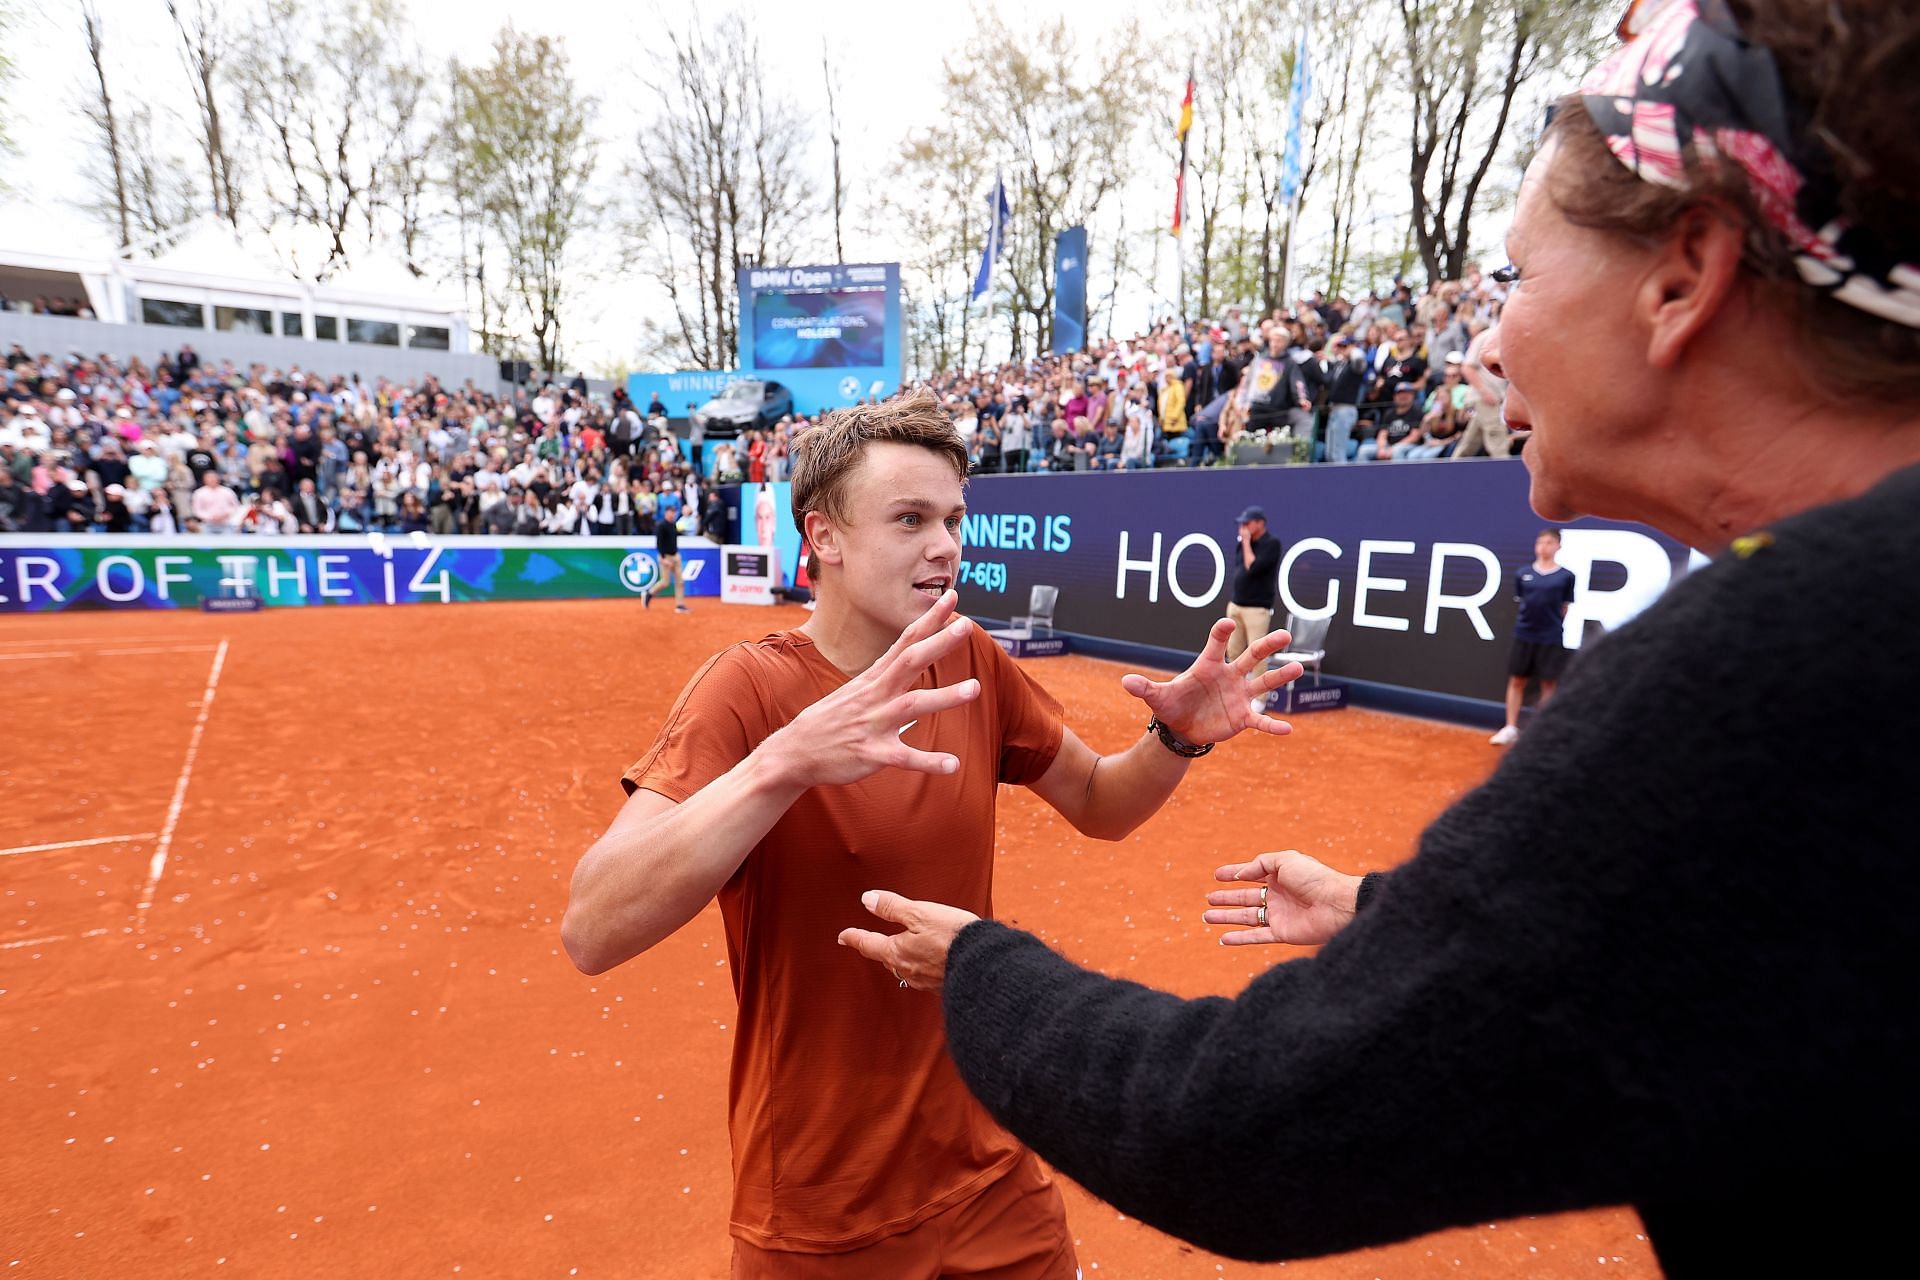 Holger Rune hugs his mother Aneke after BMW Open victory